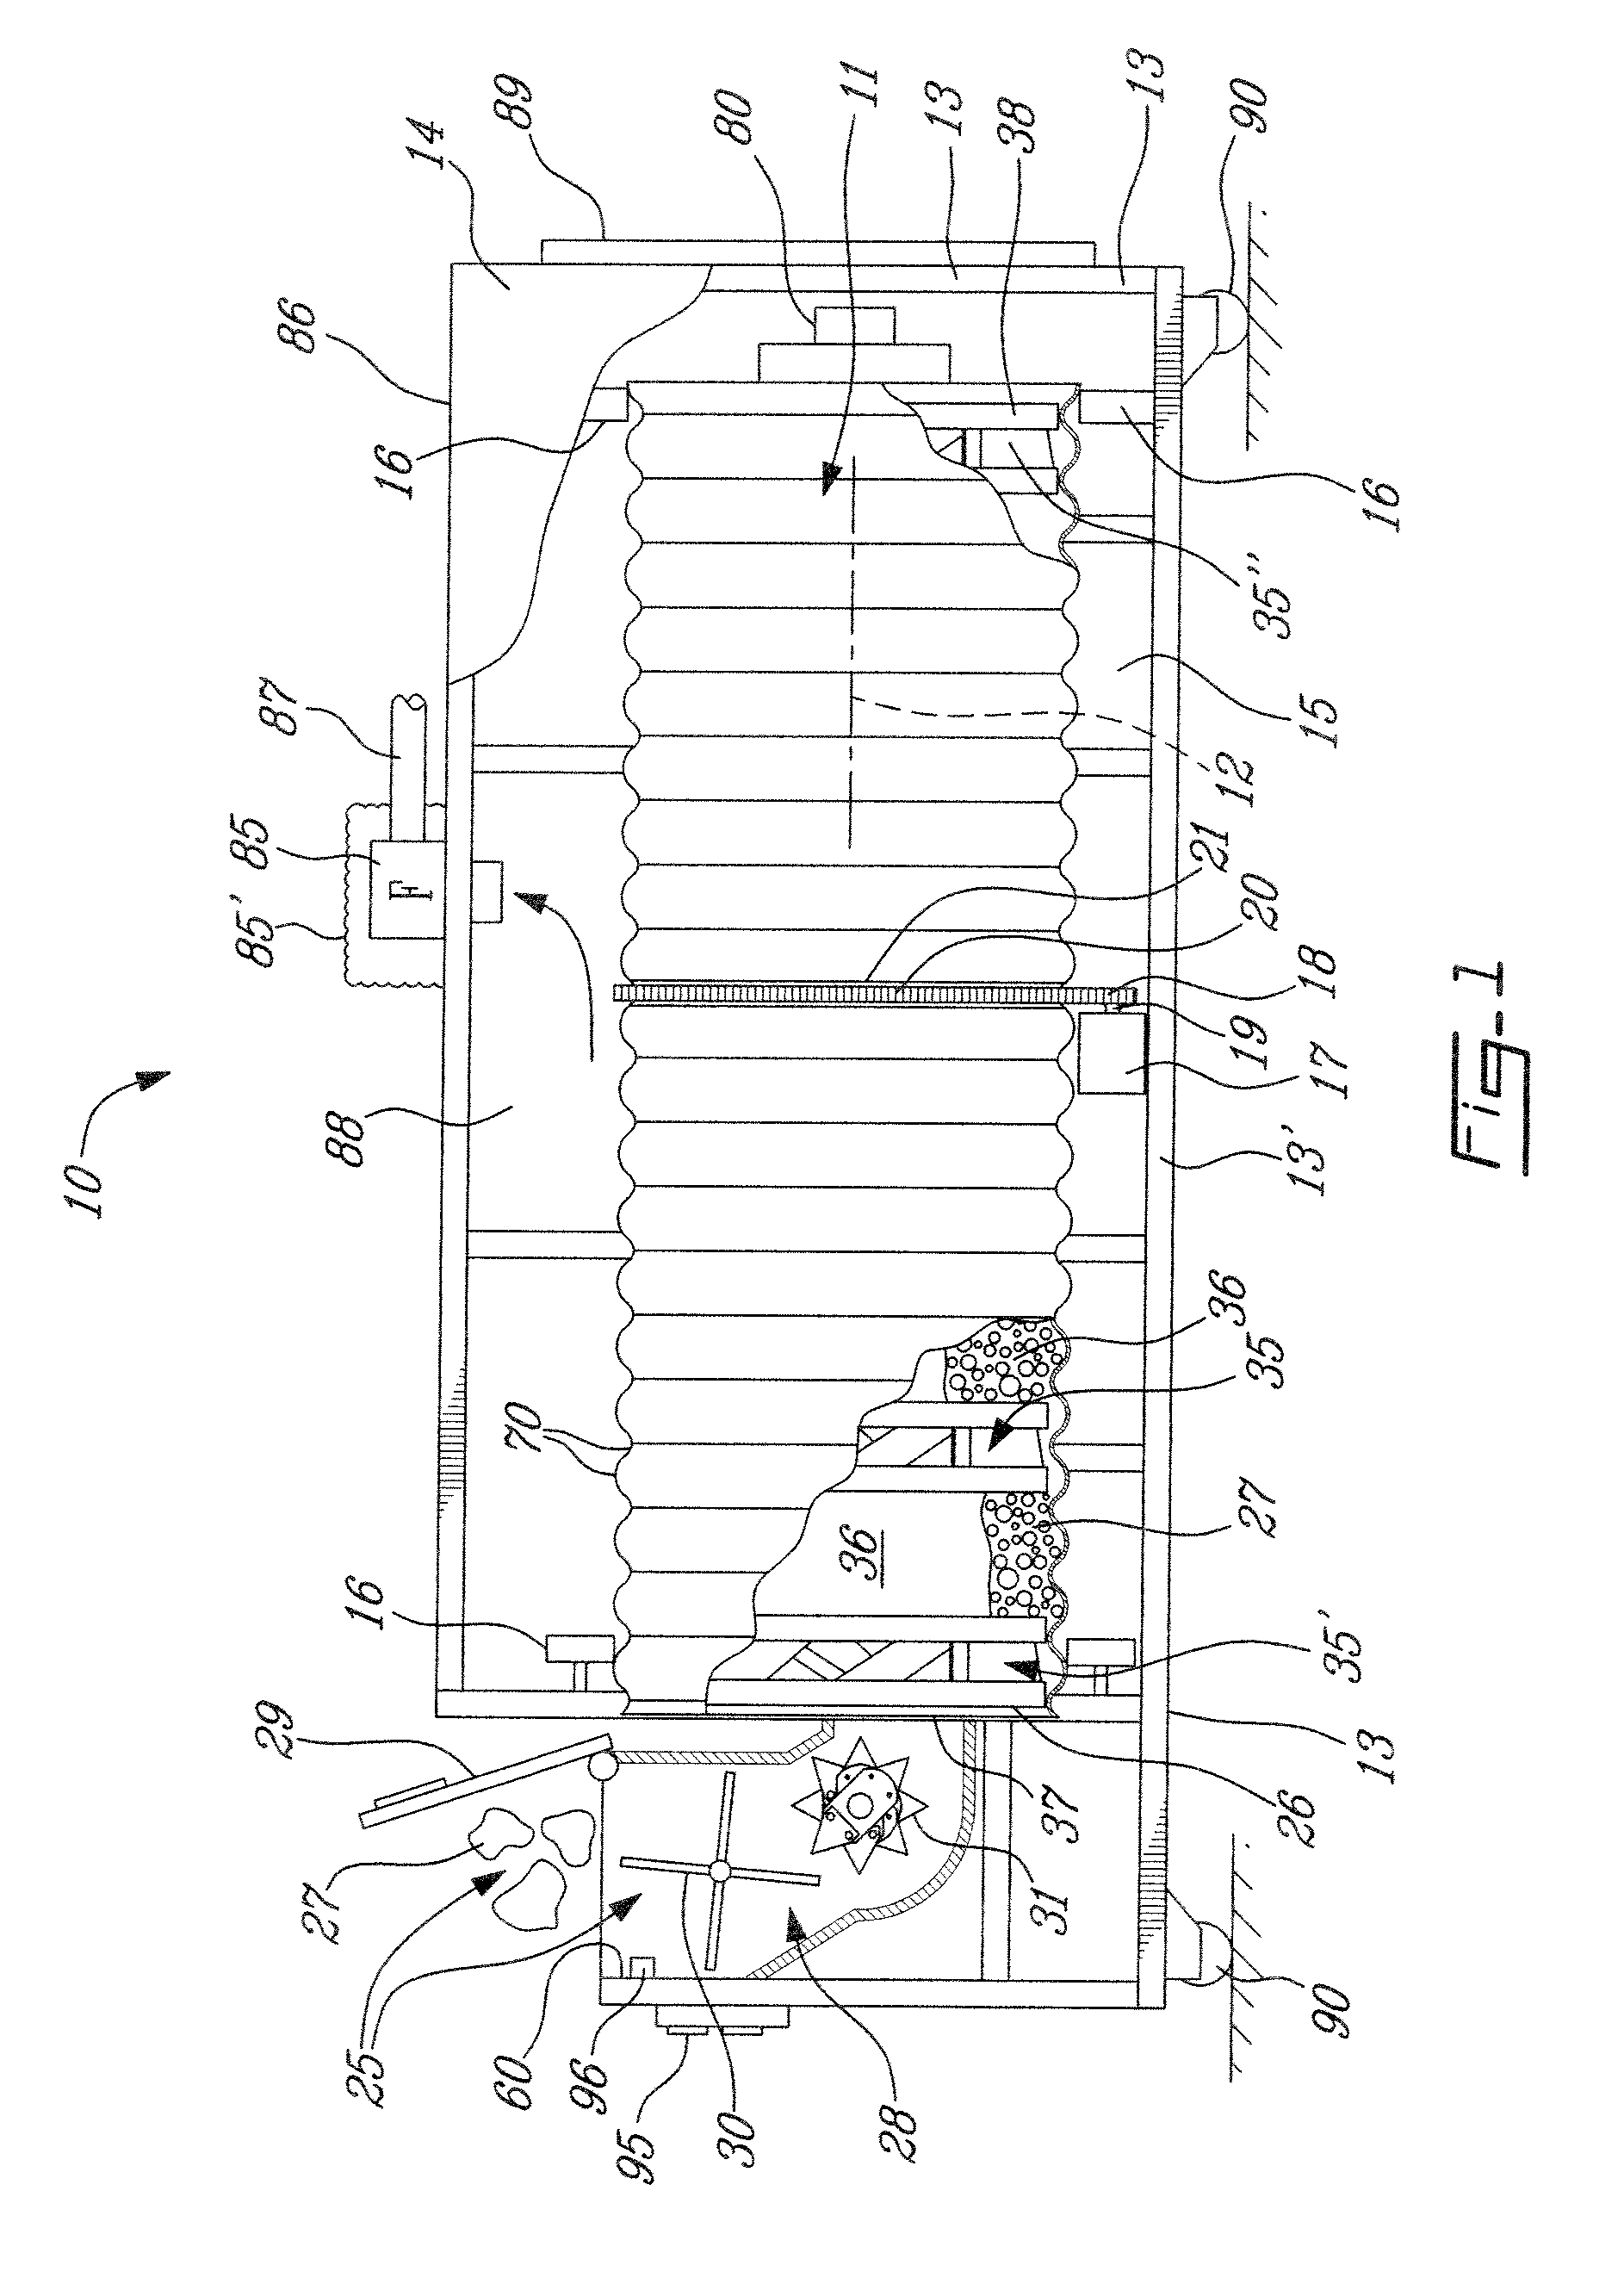 Compostng apparatus and method